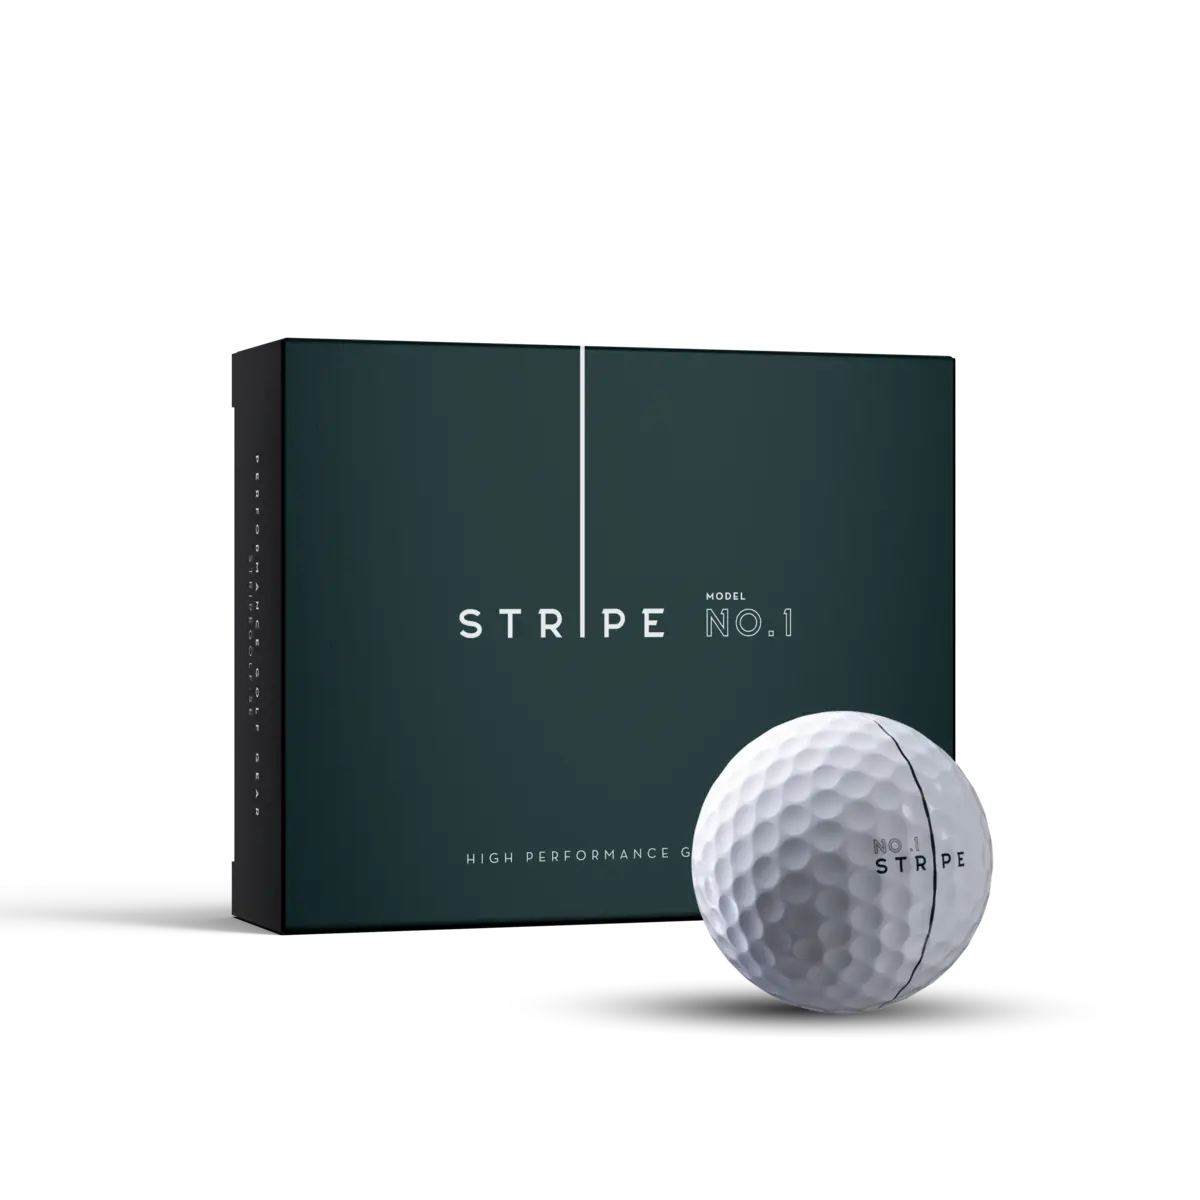 Golf with great distance and high spin at the same time - Stripe golf ball No.01